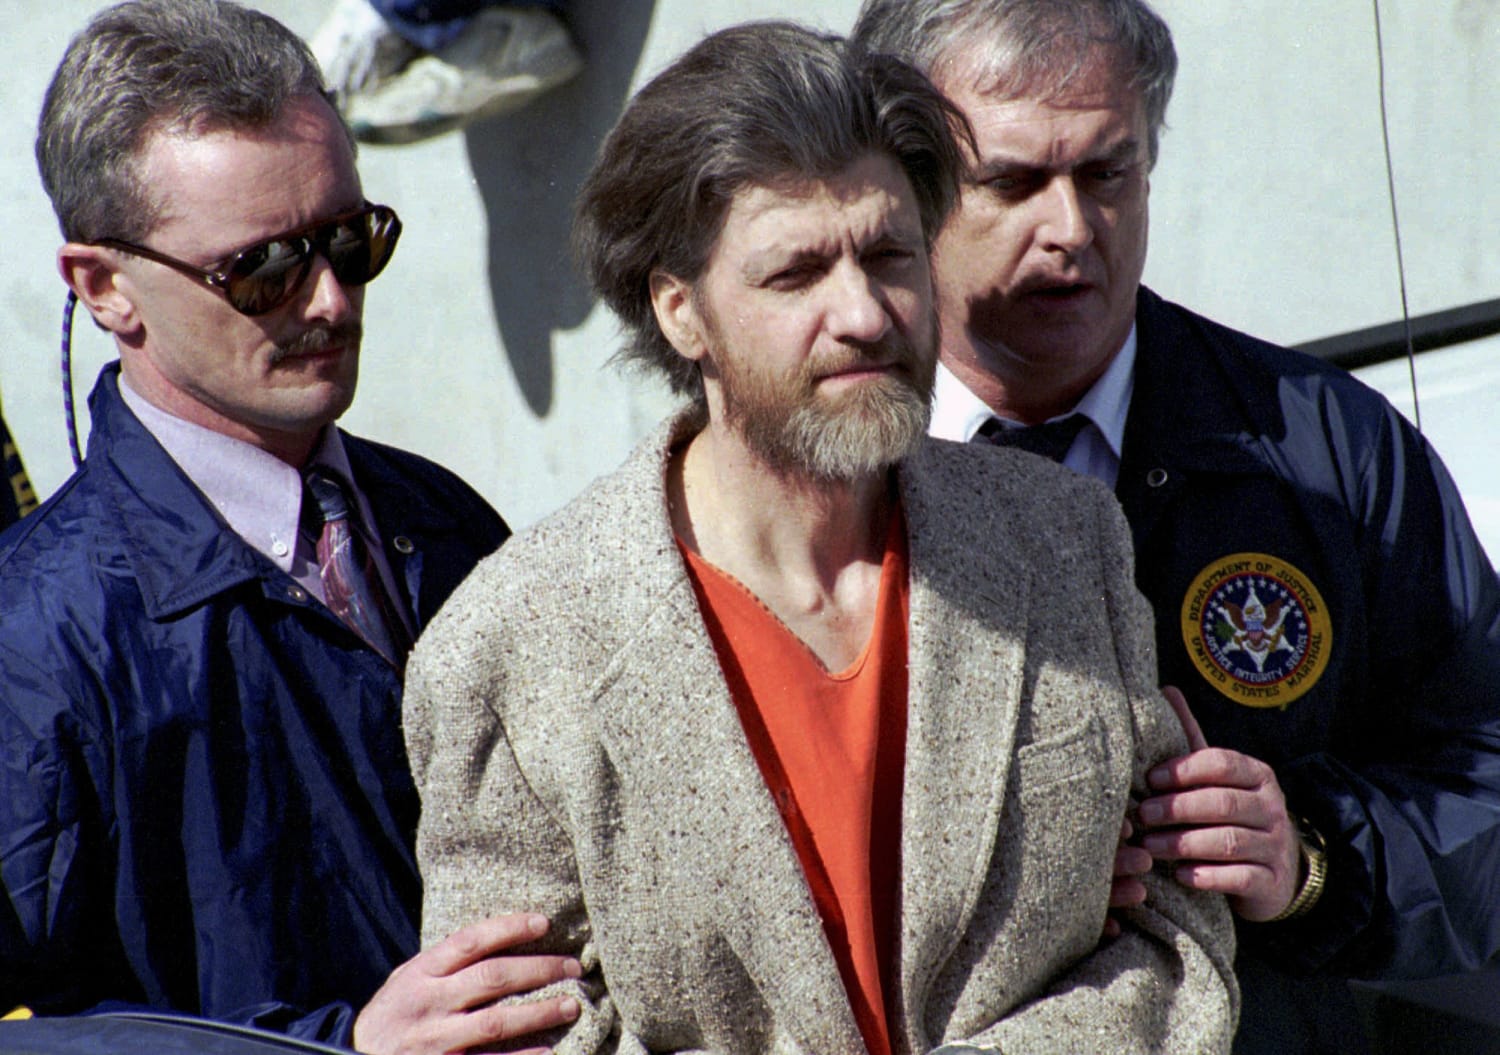 Terrorist Ted Kaczynski, well known as the ‘Unabomber’, found dead in prison cell (abcnews.go.com)